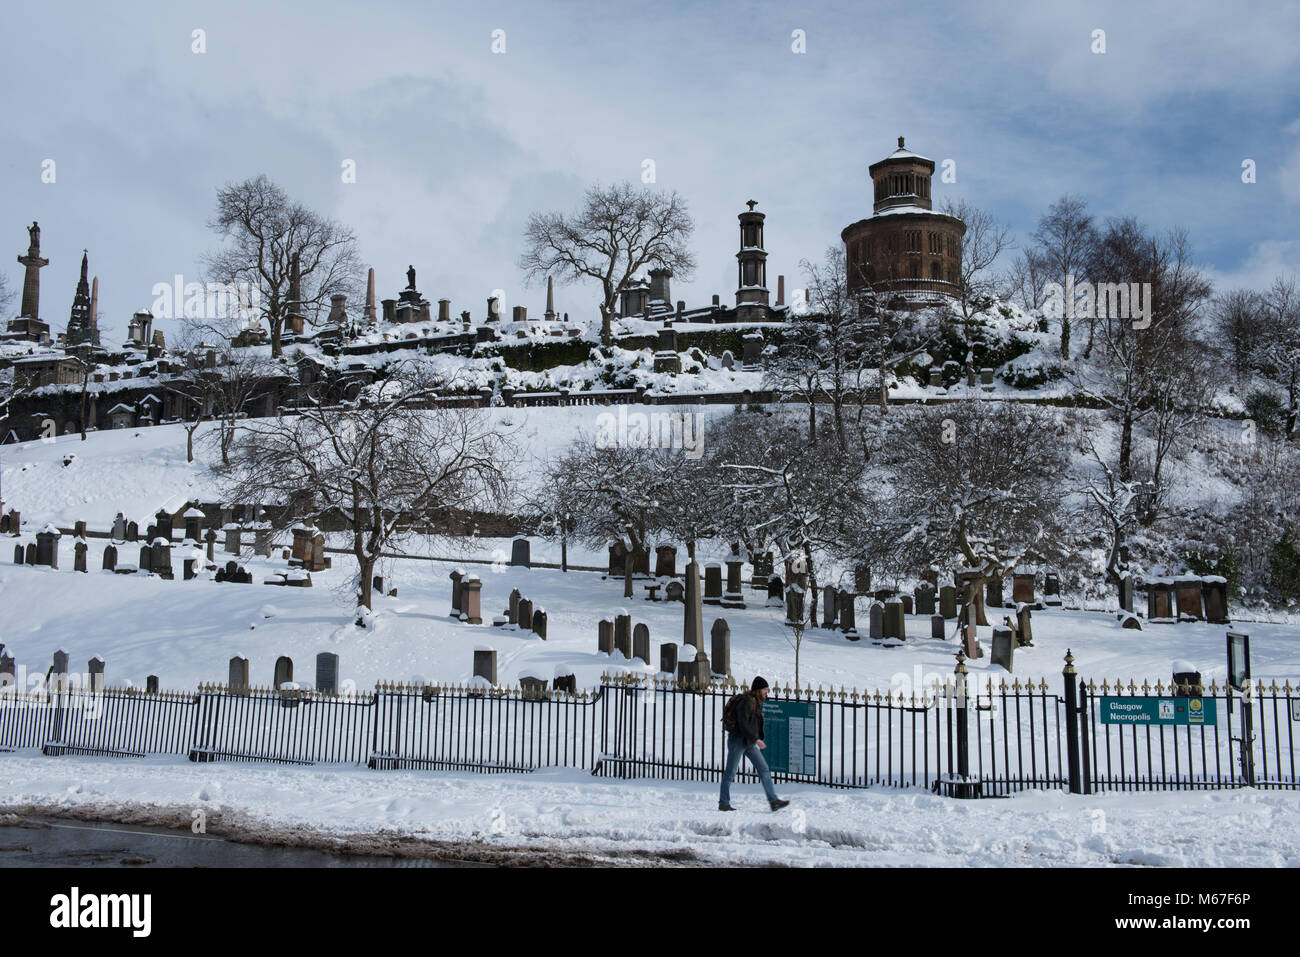 Glasgow, Scotland, UK. 1st March, 2018. The Necropolis graveyard in Glasgow covered in snow as Beast from the East weather system hits Scotland Credit: Tony Clerkson/Alamy Live News Stock Photo